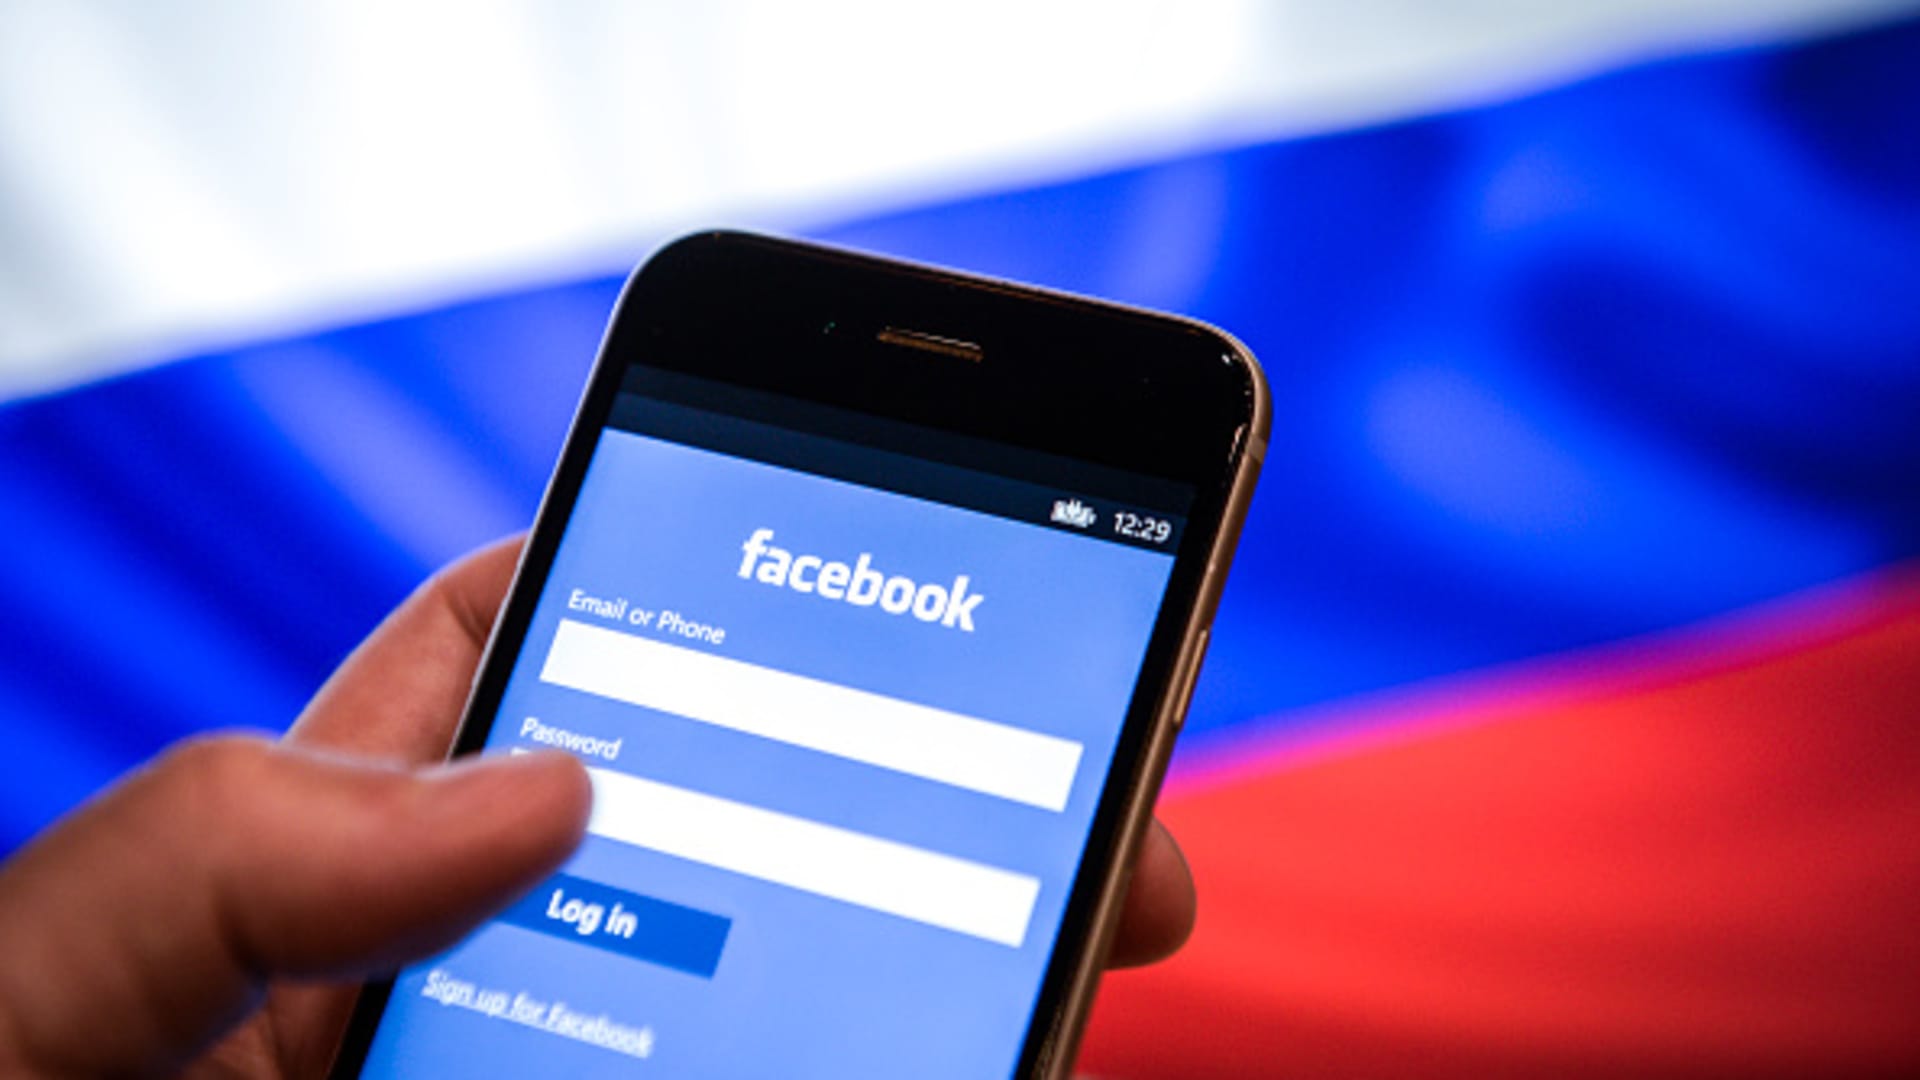 An iPhone with a Facebook logo is seen with a Russian flag in the background in this photo illustration.